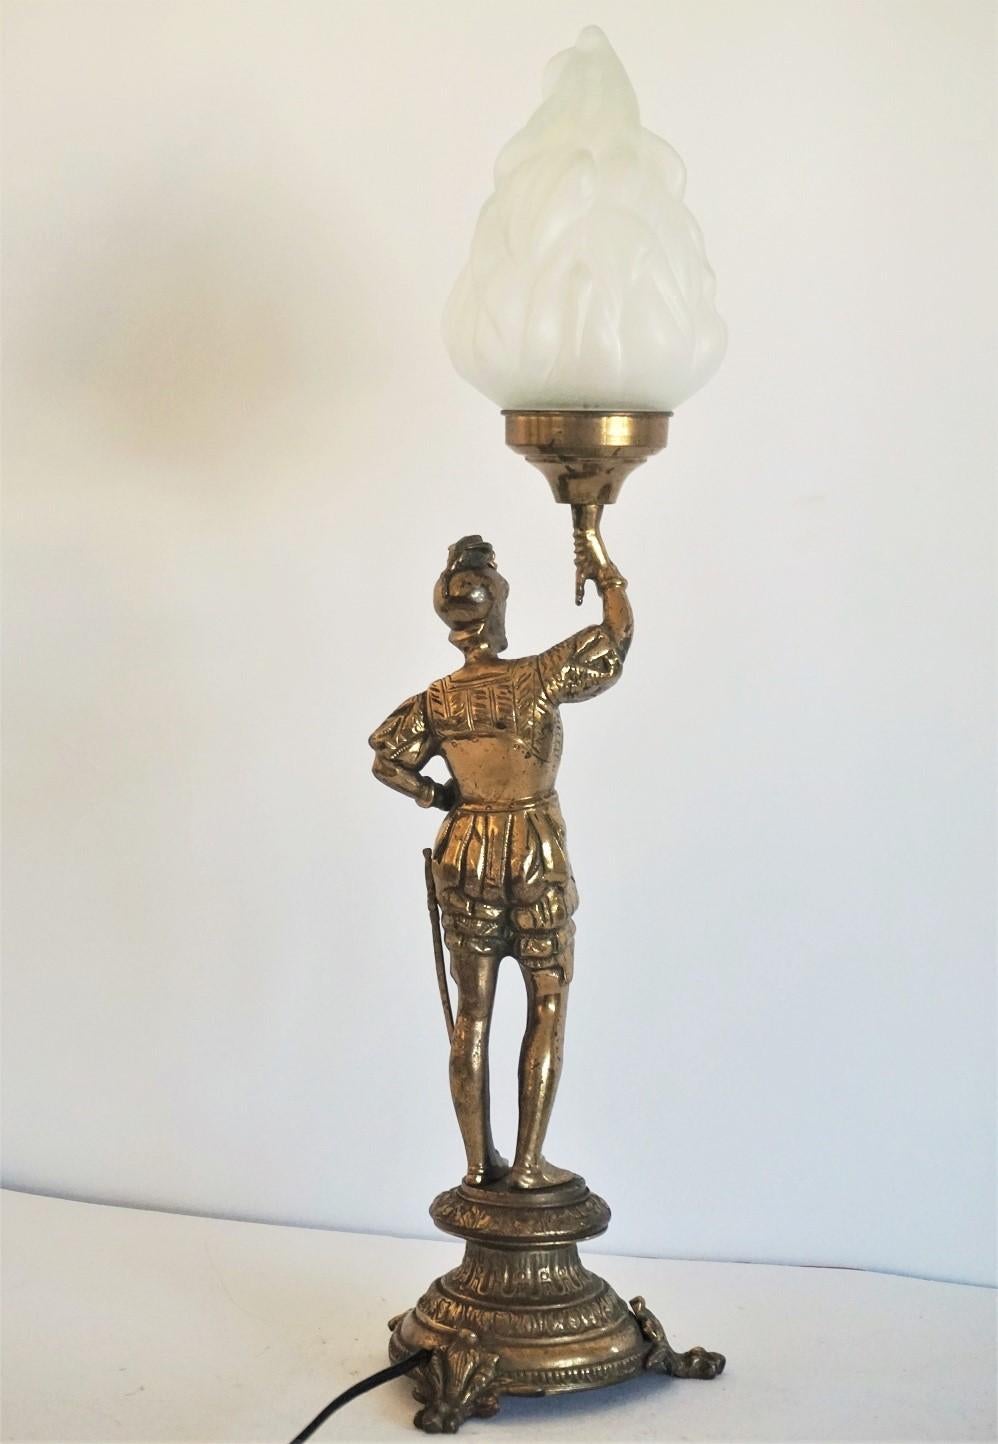 Glass Early 20th Century Bronze Knight Sculpture Electrified Table or Desk Lamp For Sale